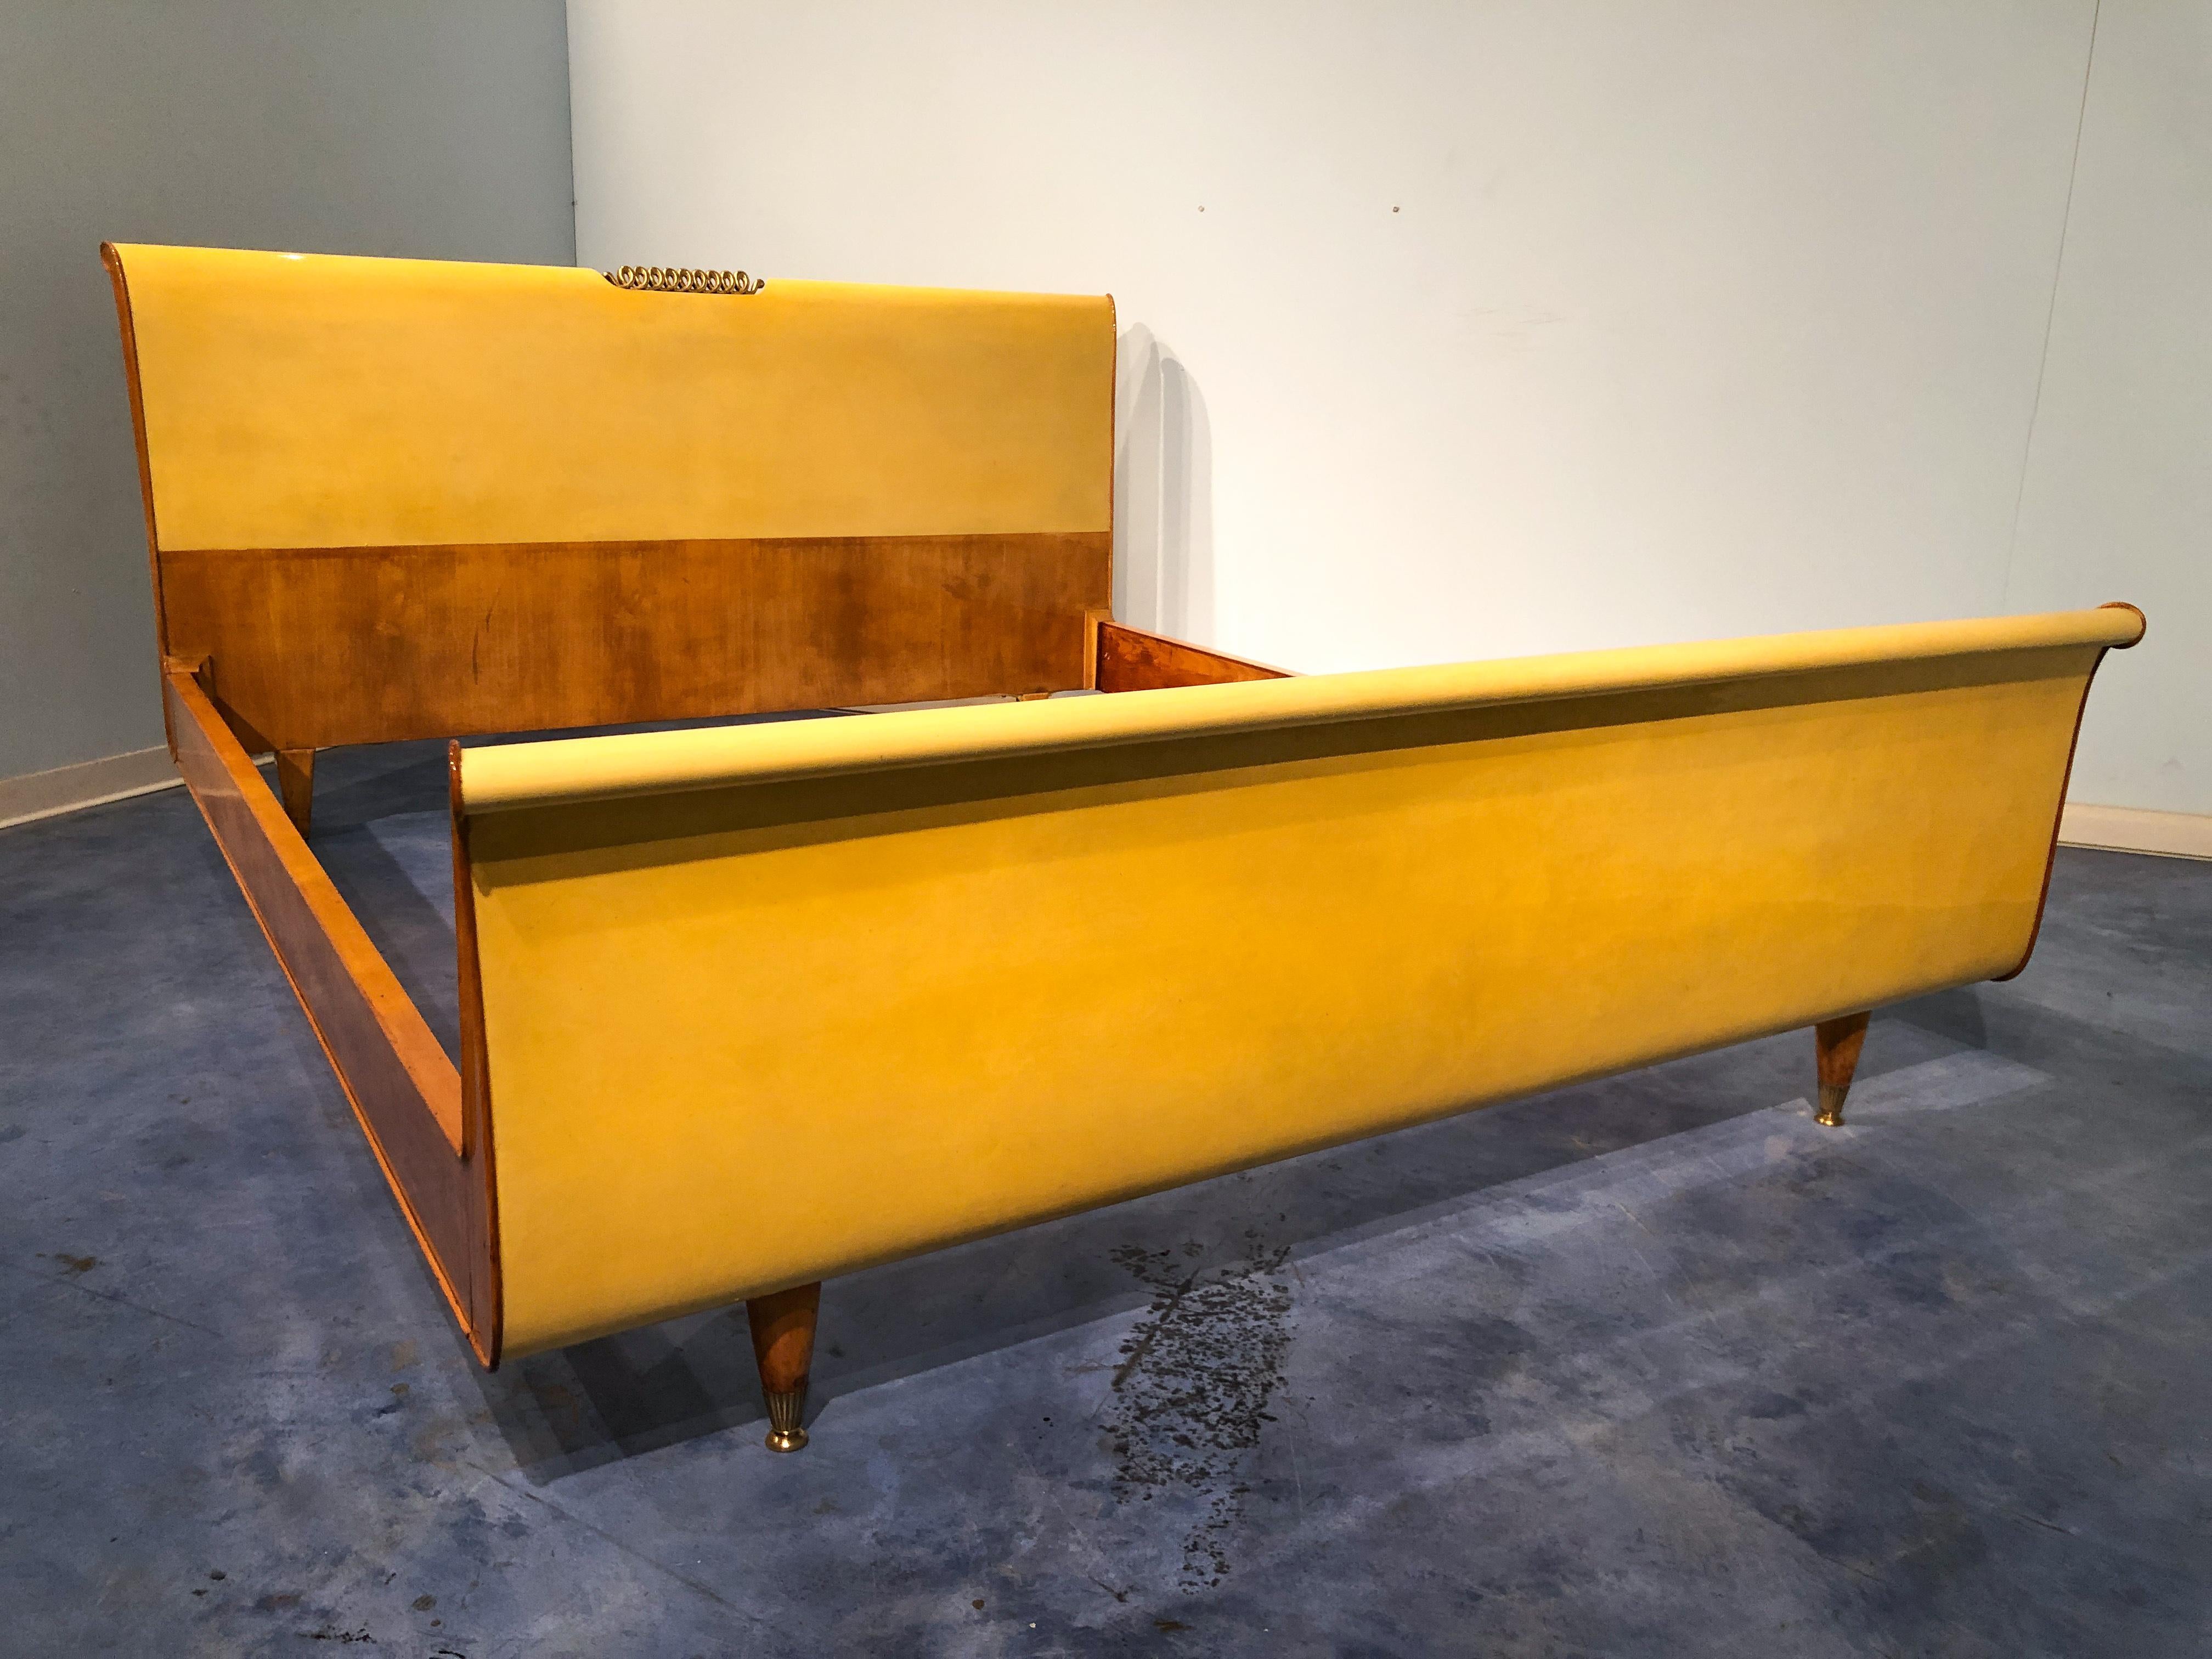 Very rare Italian Mid-century Modern bed in parchment and maple of the 1950s. The bed has beautiful sinuous lines, legs decorated with brass sabots and golden decoration on the headboard.